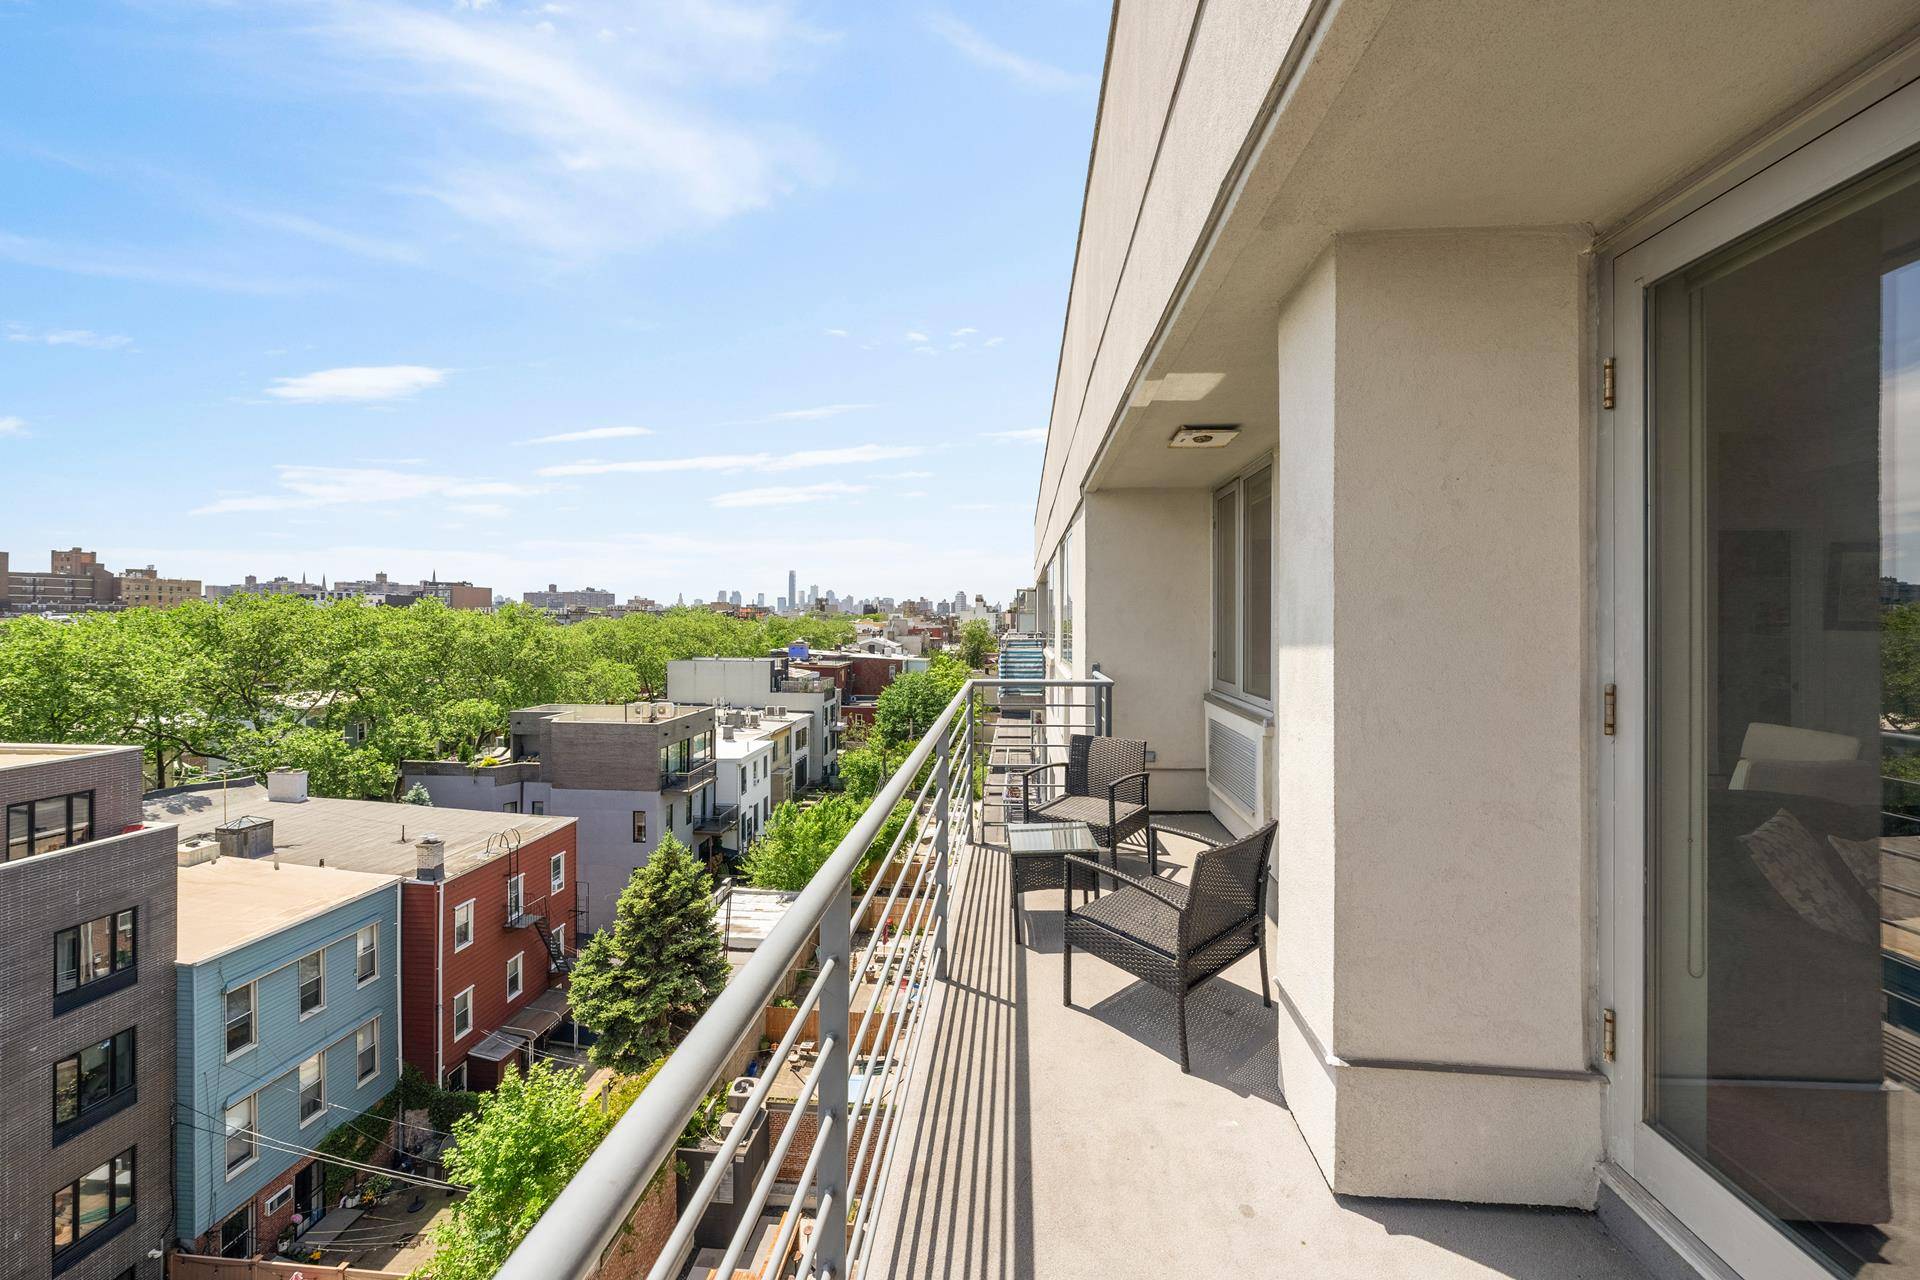 BRING YOUR SUNGLASSES ! Top Floor TRUE Two Bedroom Two Bathroom home with Private Terrace located in one of the only Full Service Luxury Doorman Buildings in East Williamsburg.